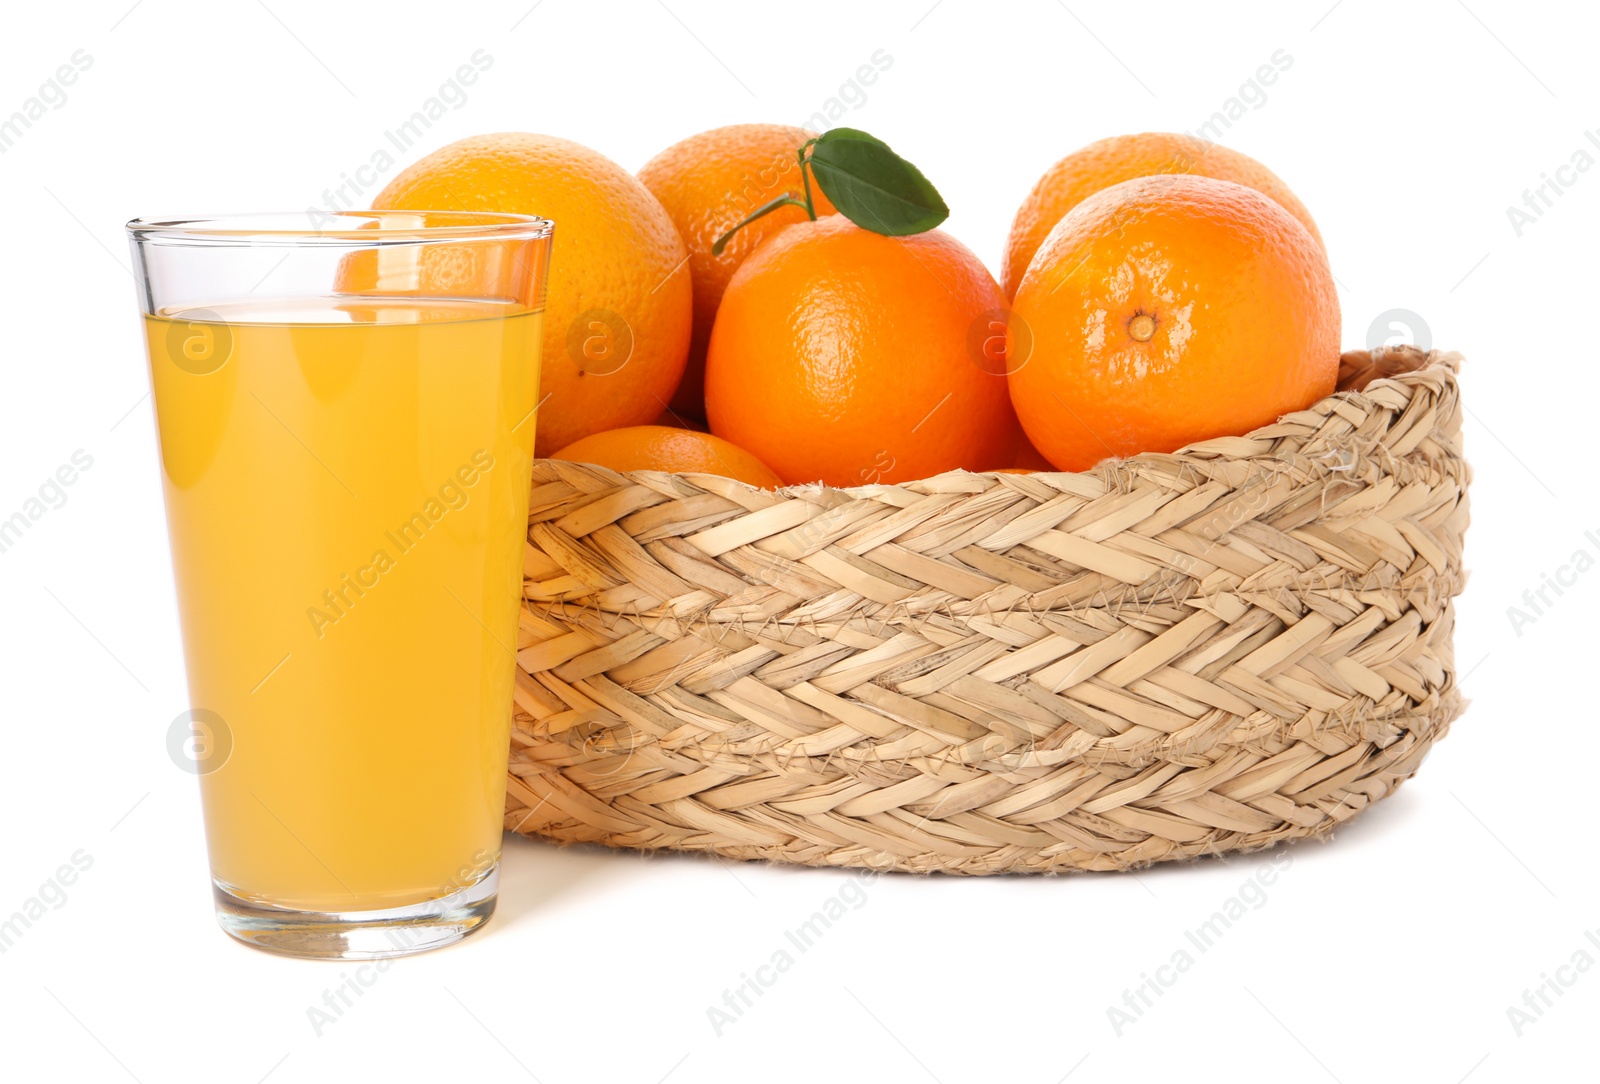 Photo of Fresh oranges in wicker basket and glass of juice isolated on white